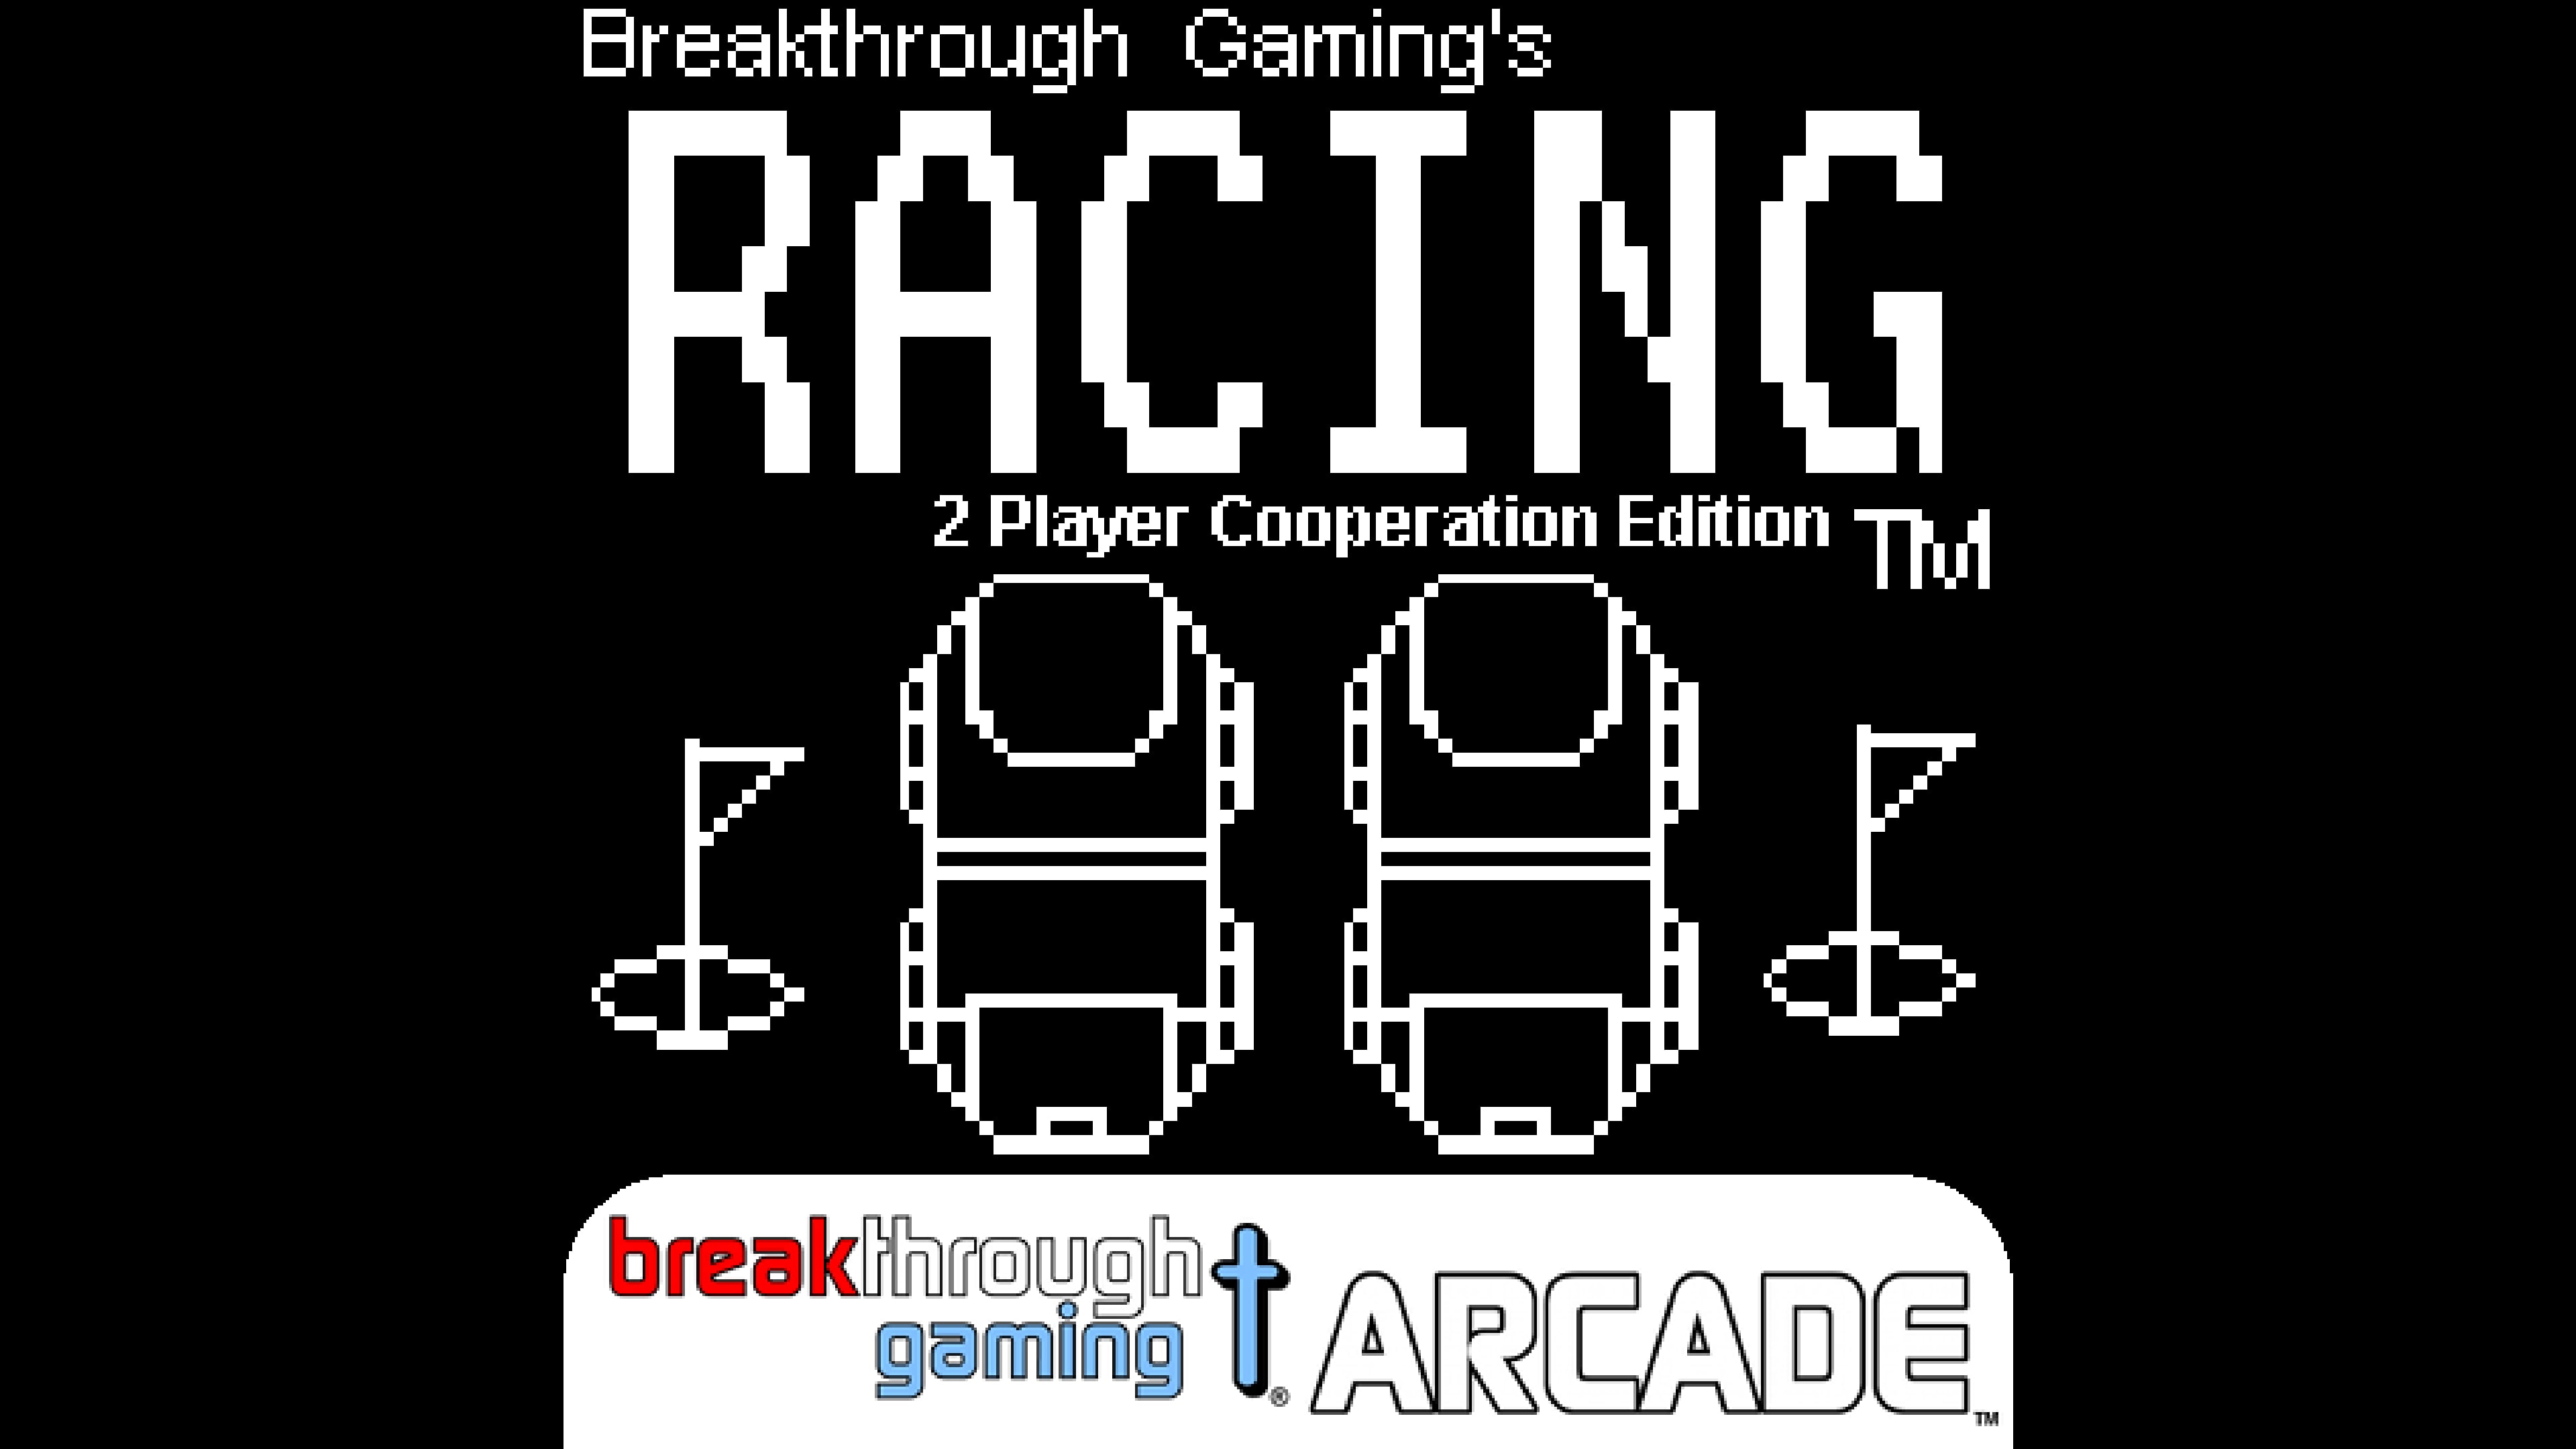 Racing (2 Player Cooperation Edition) - Breakthrough Gaming Arcade